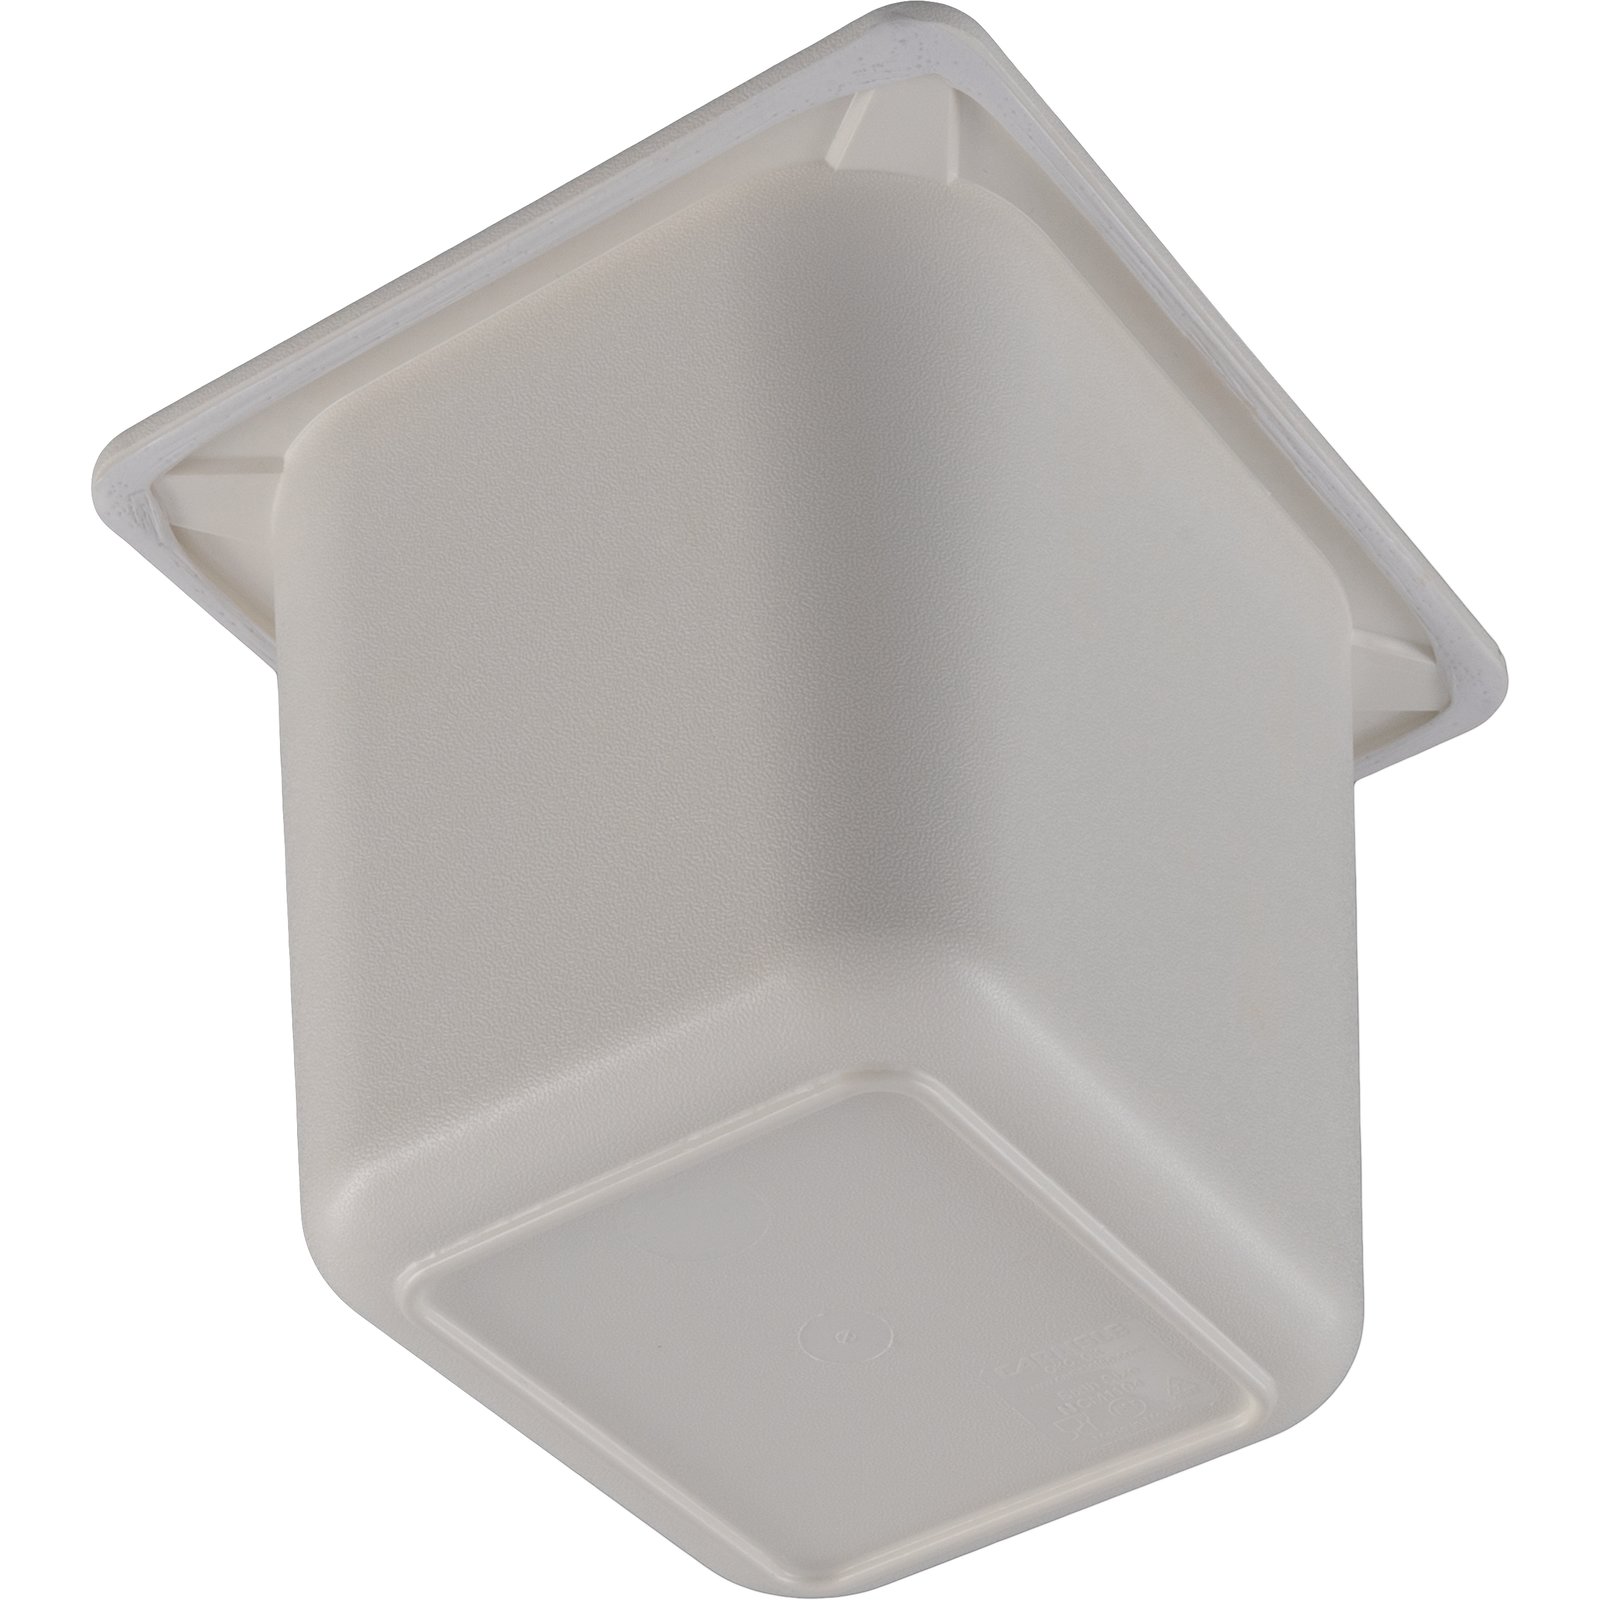 Rubbermaid Commercial Cold Food Pan Half Size SKU#RCP126P